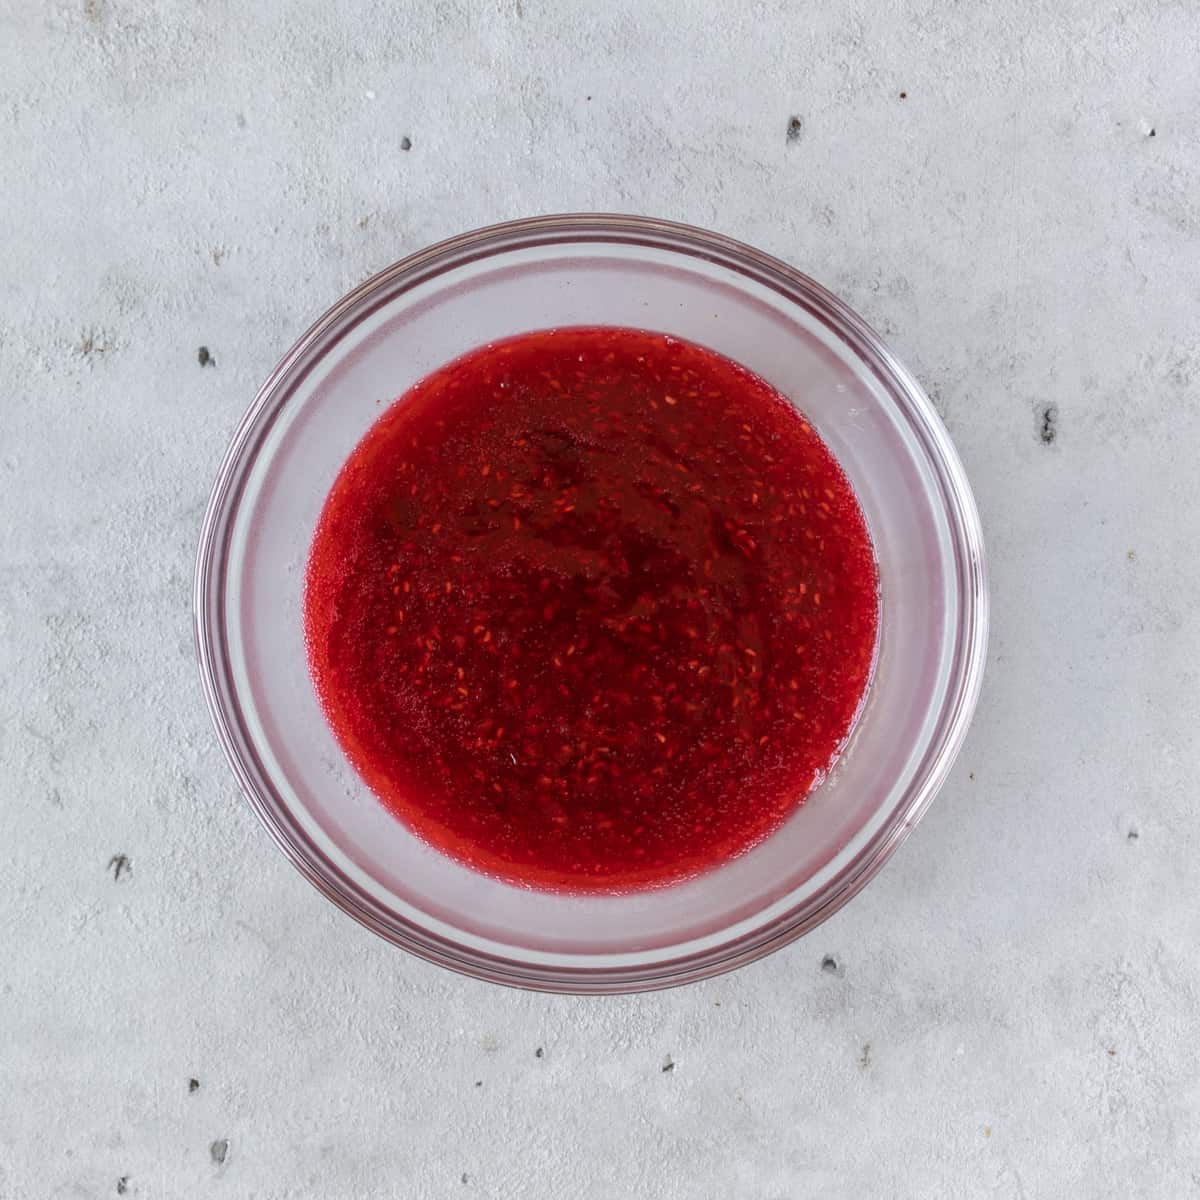 the raspberry jam in a glass bowl on a grey background